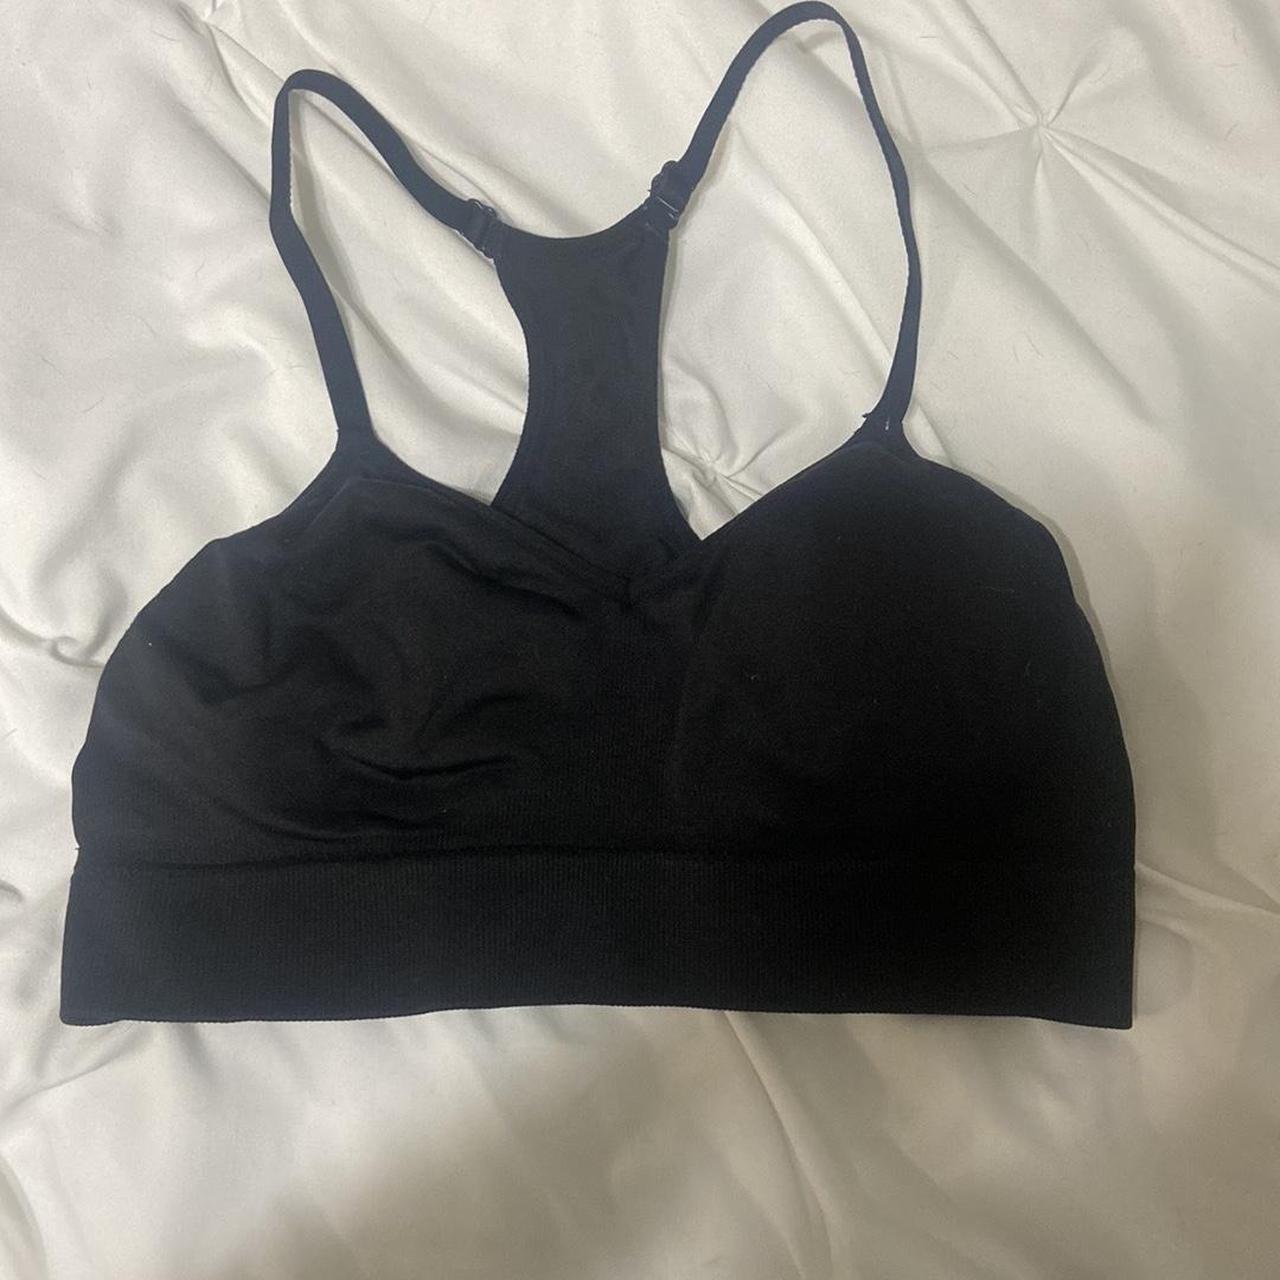 athletic works sports bra size 38! equivalent to a - Depop